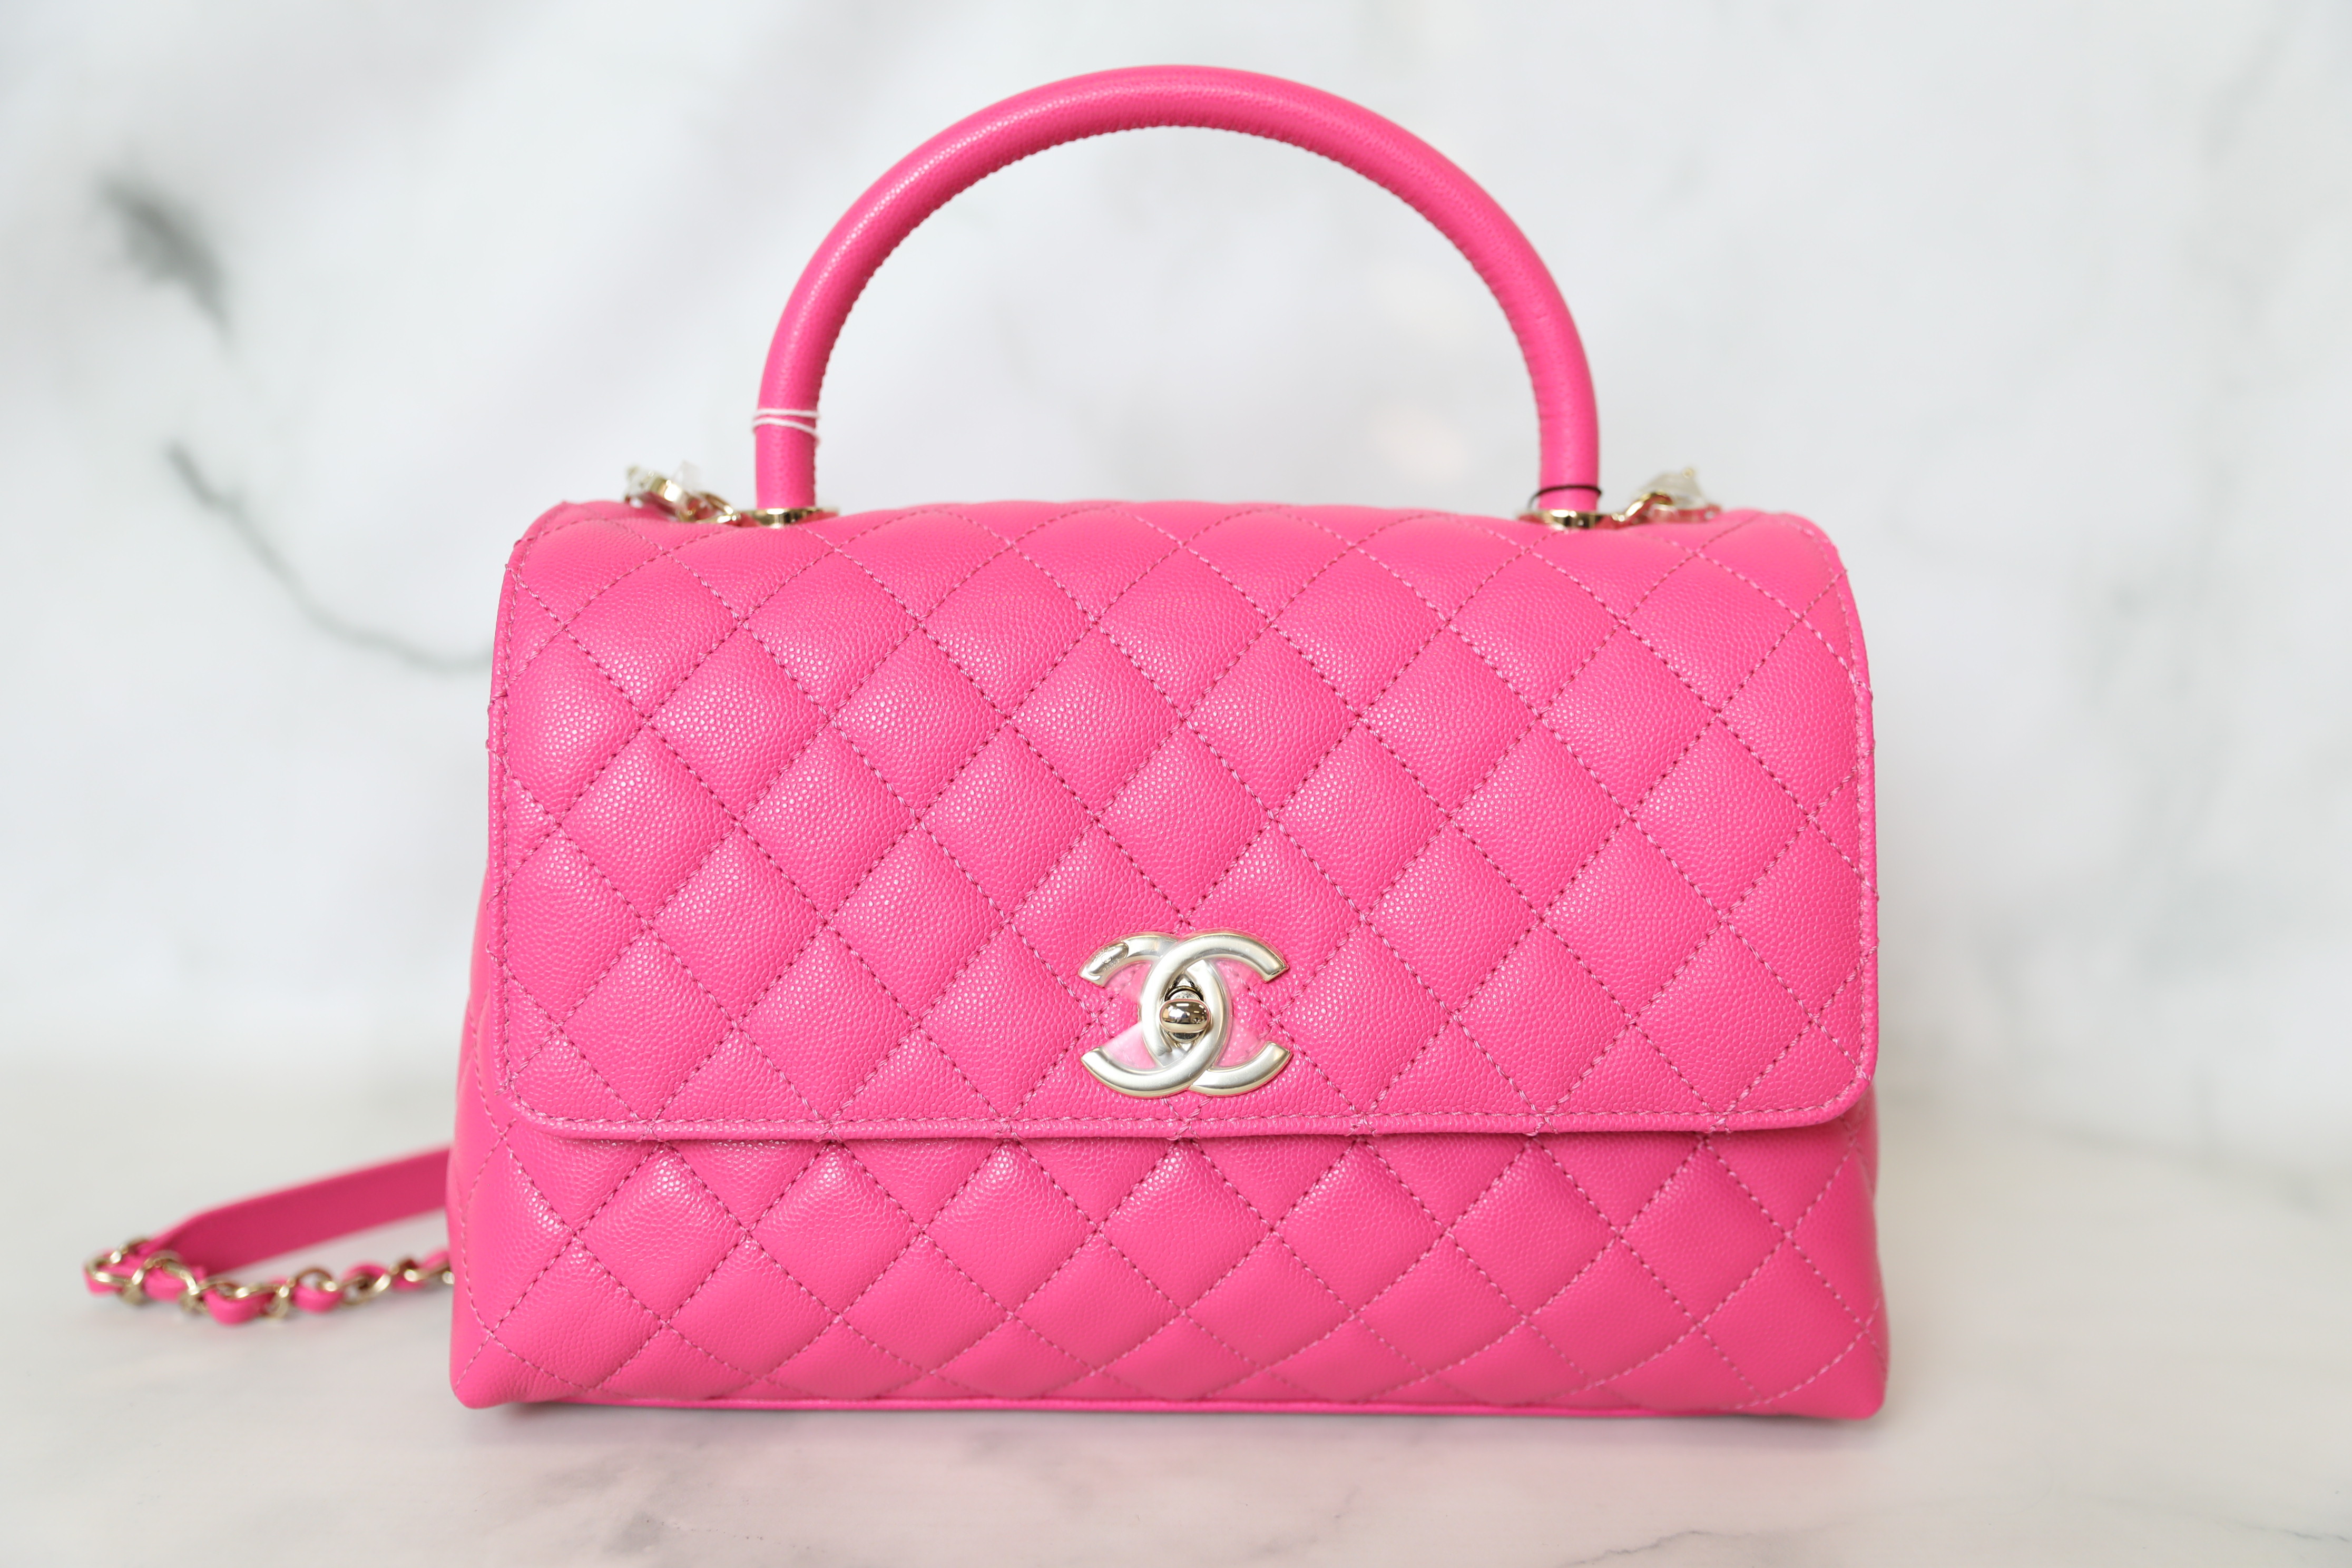 Chanel Coco Handle Small, Bright Pink Caviar with Gold Hardware